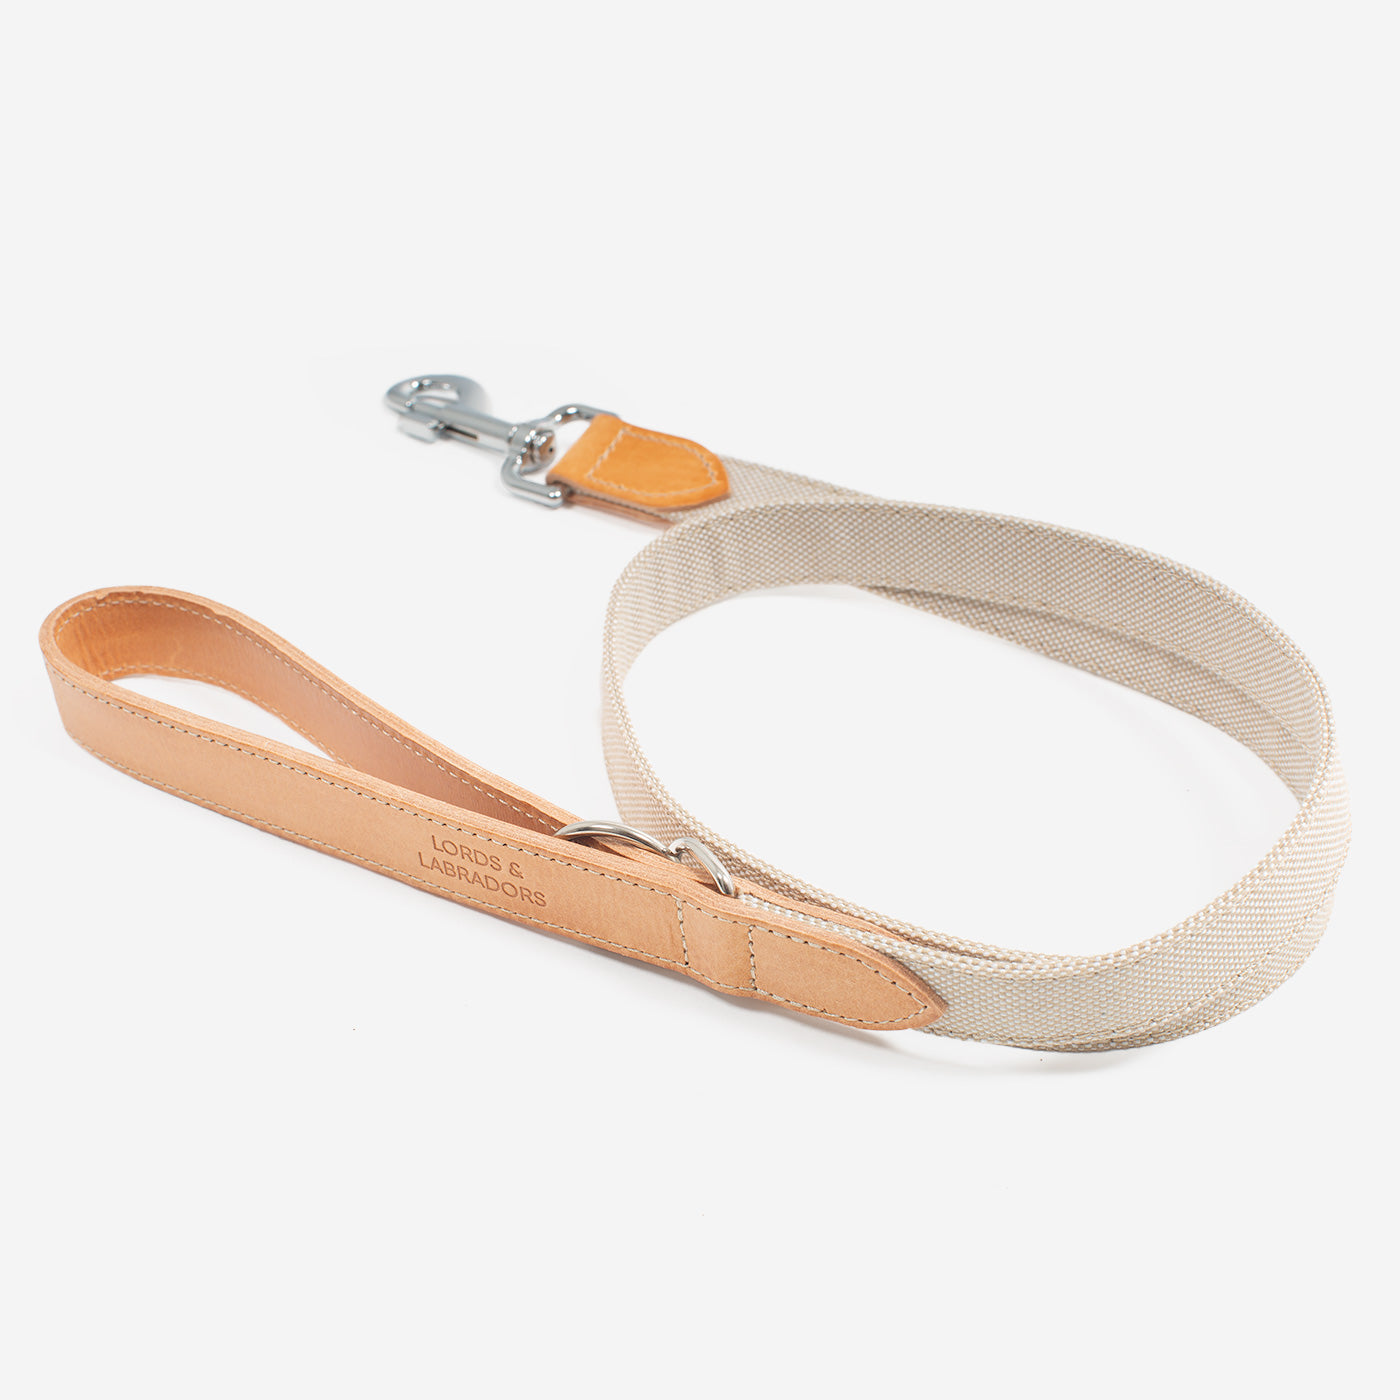 Discover dog walking luxury with our handcrafted Italian dog lead in beautiful essentials twill cream linen with cream fabric! The perfect lead for dogs available now at Lords & Labradors 